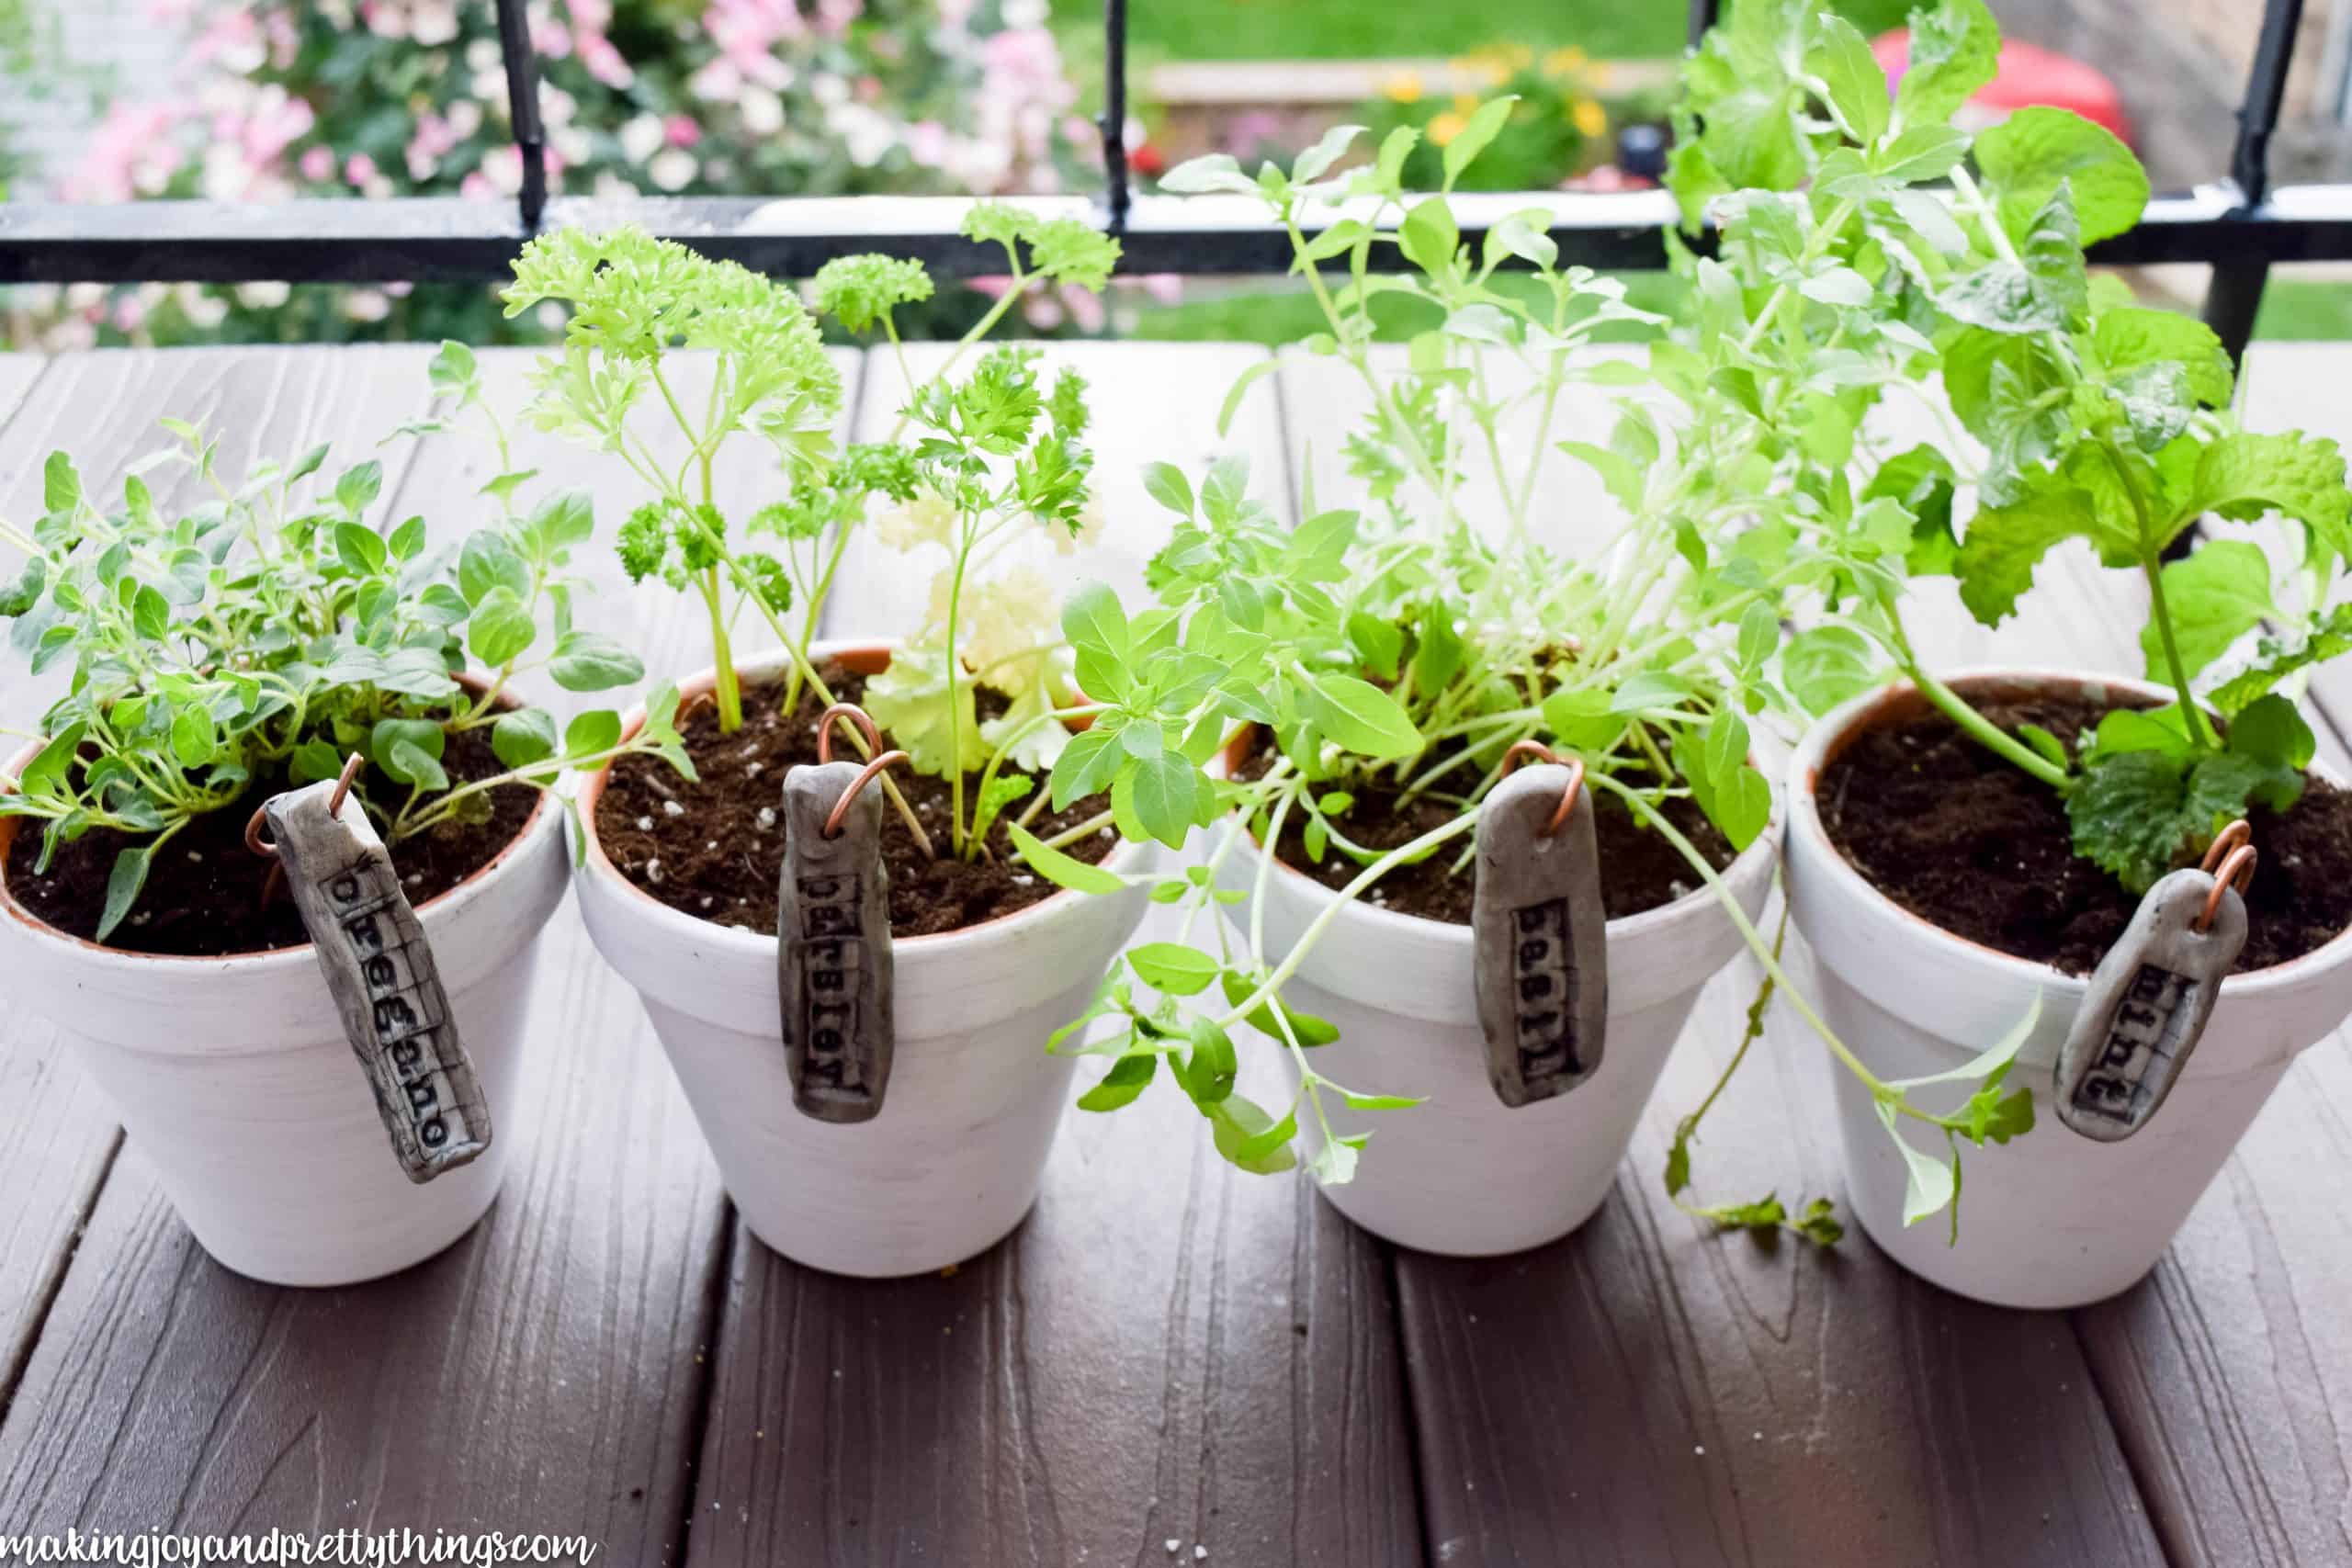 Using DIY garden markers to label the plants for a hanging herb garden in white clay pots